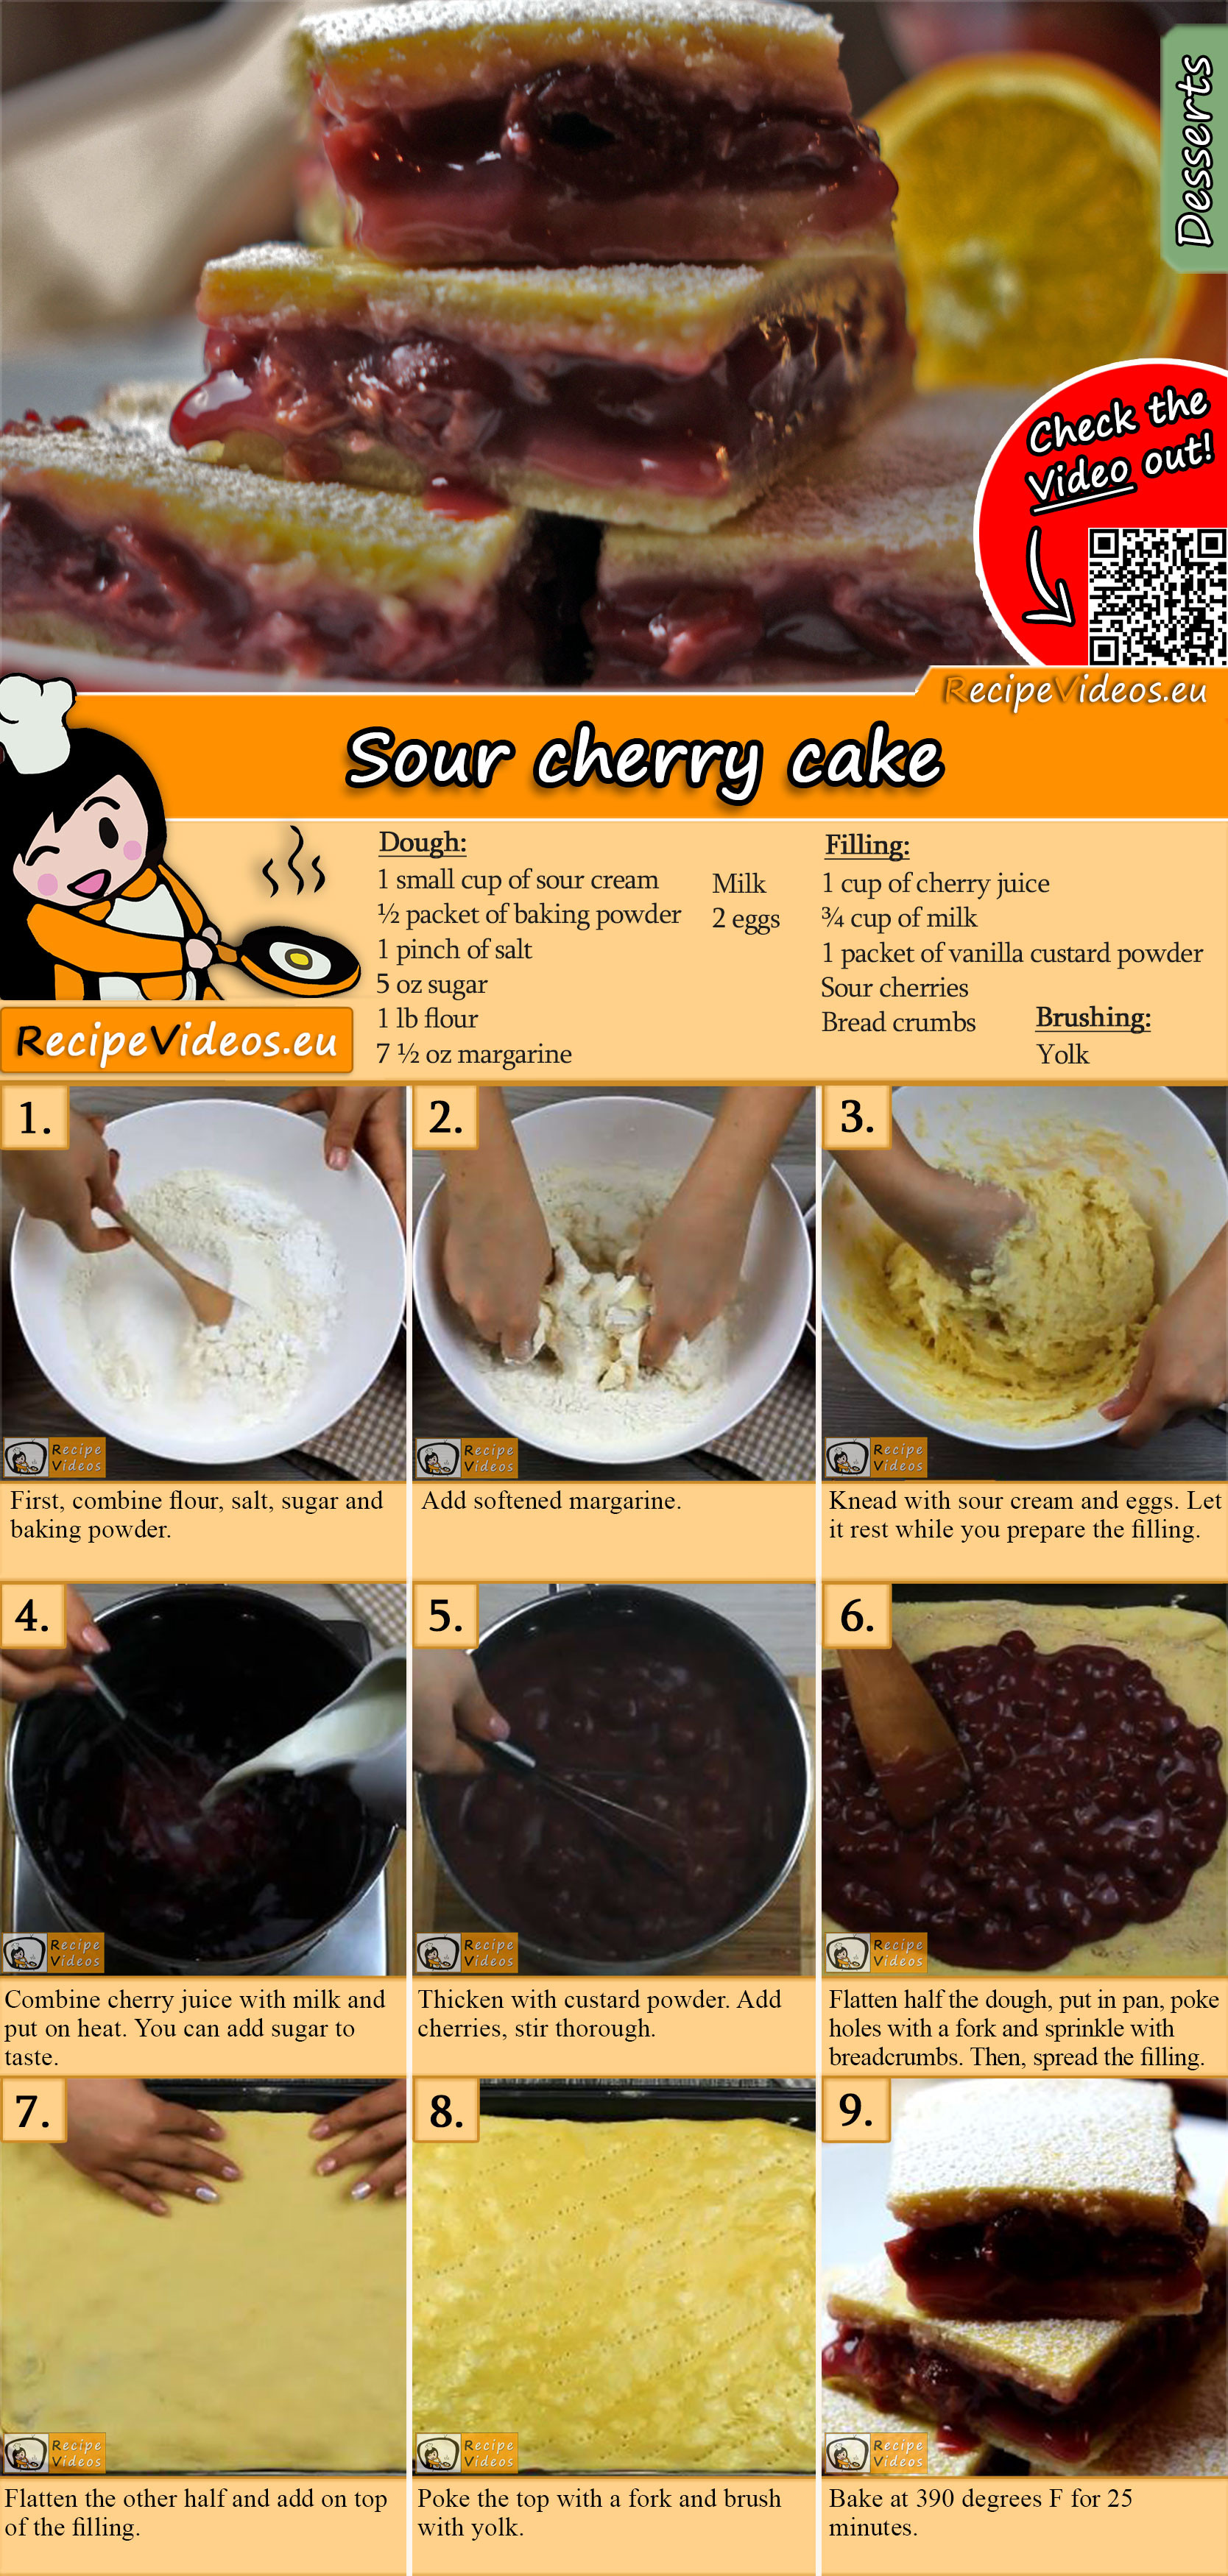 Sour cherry cake recipe with video